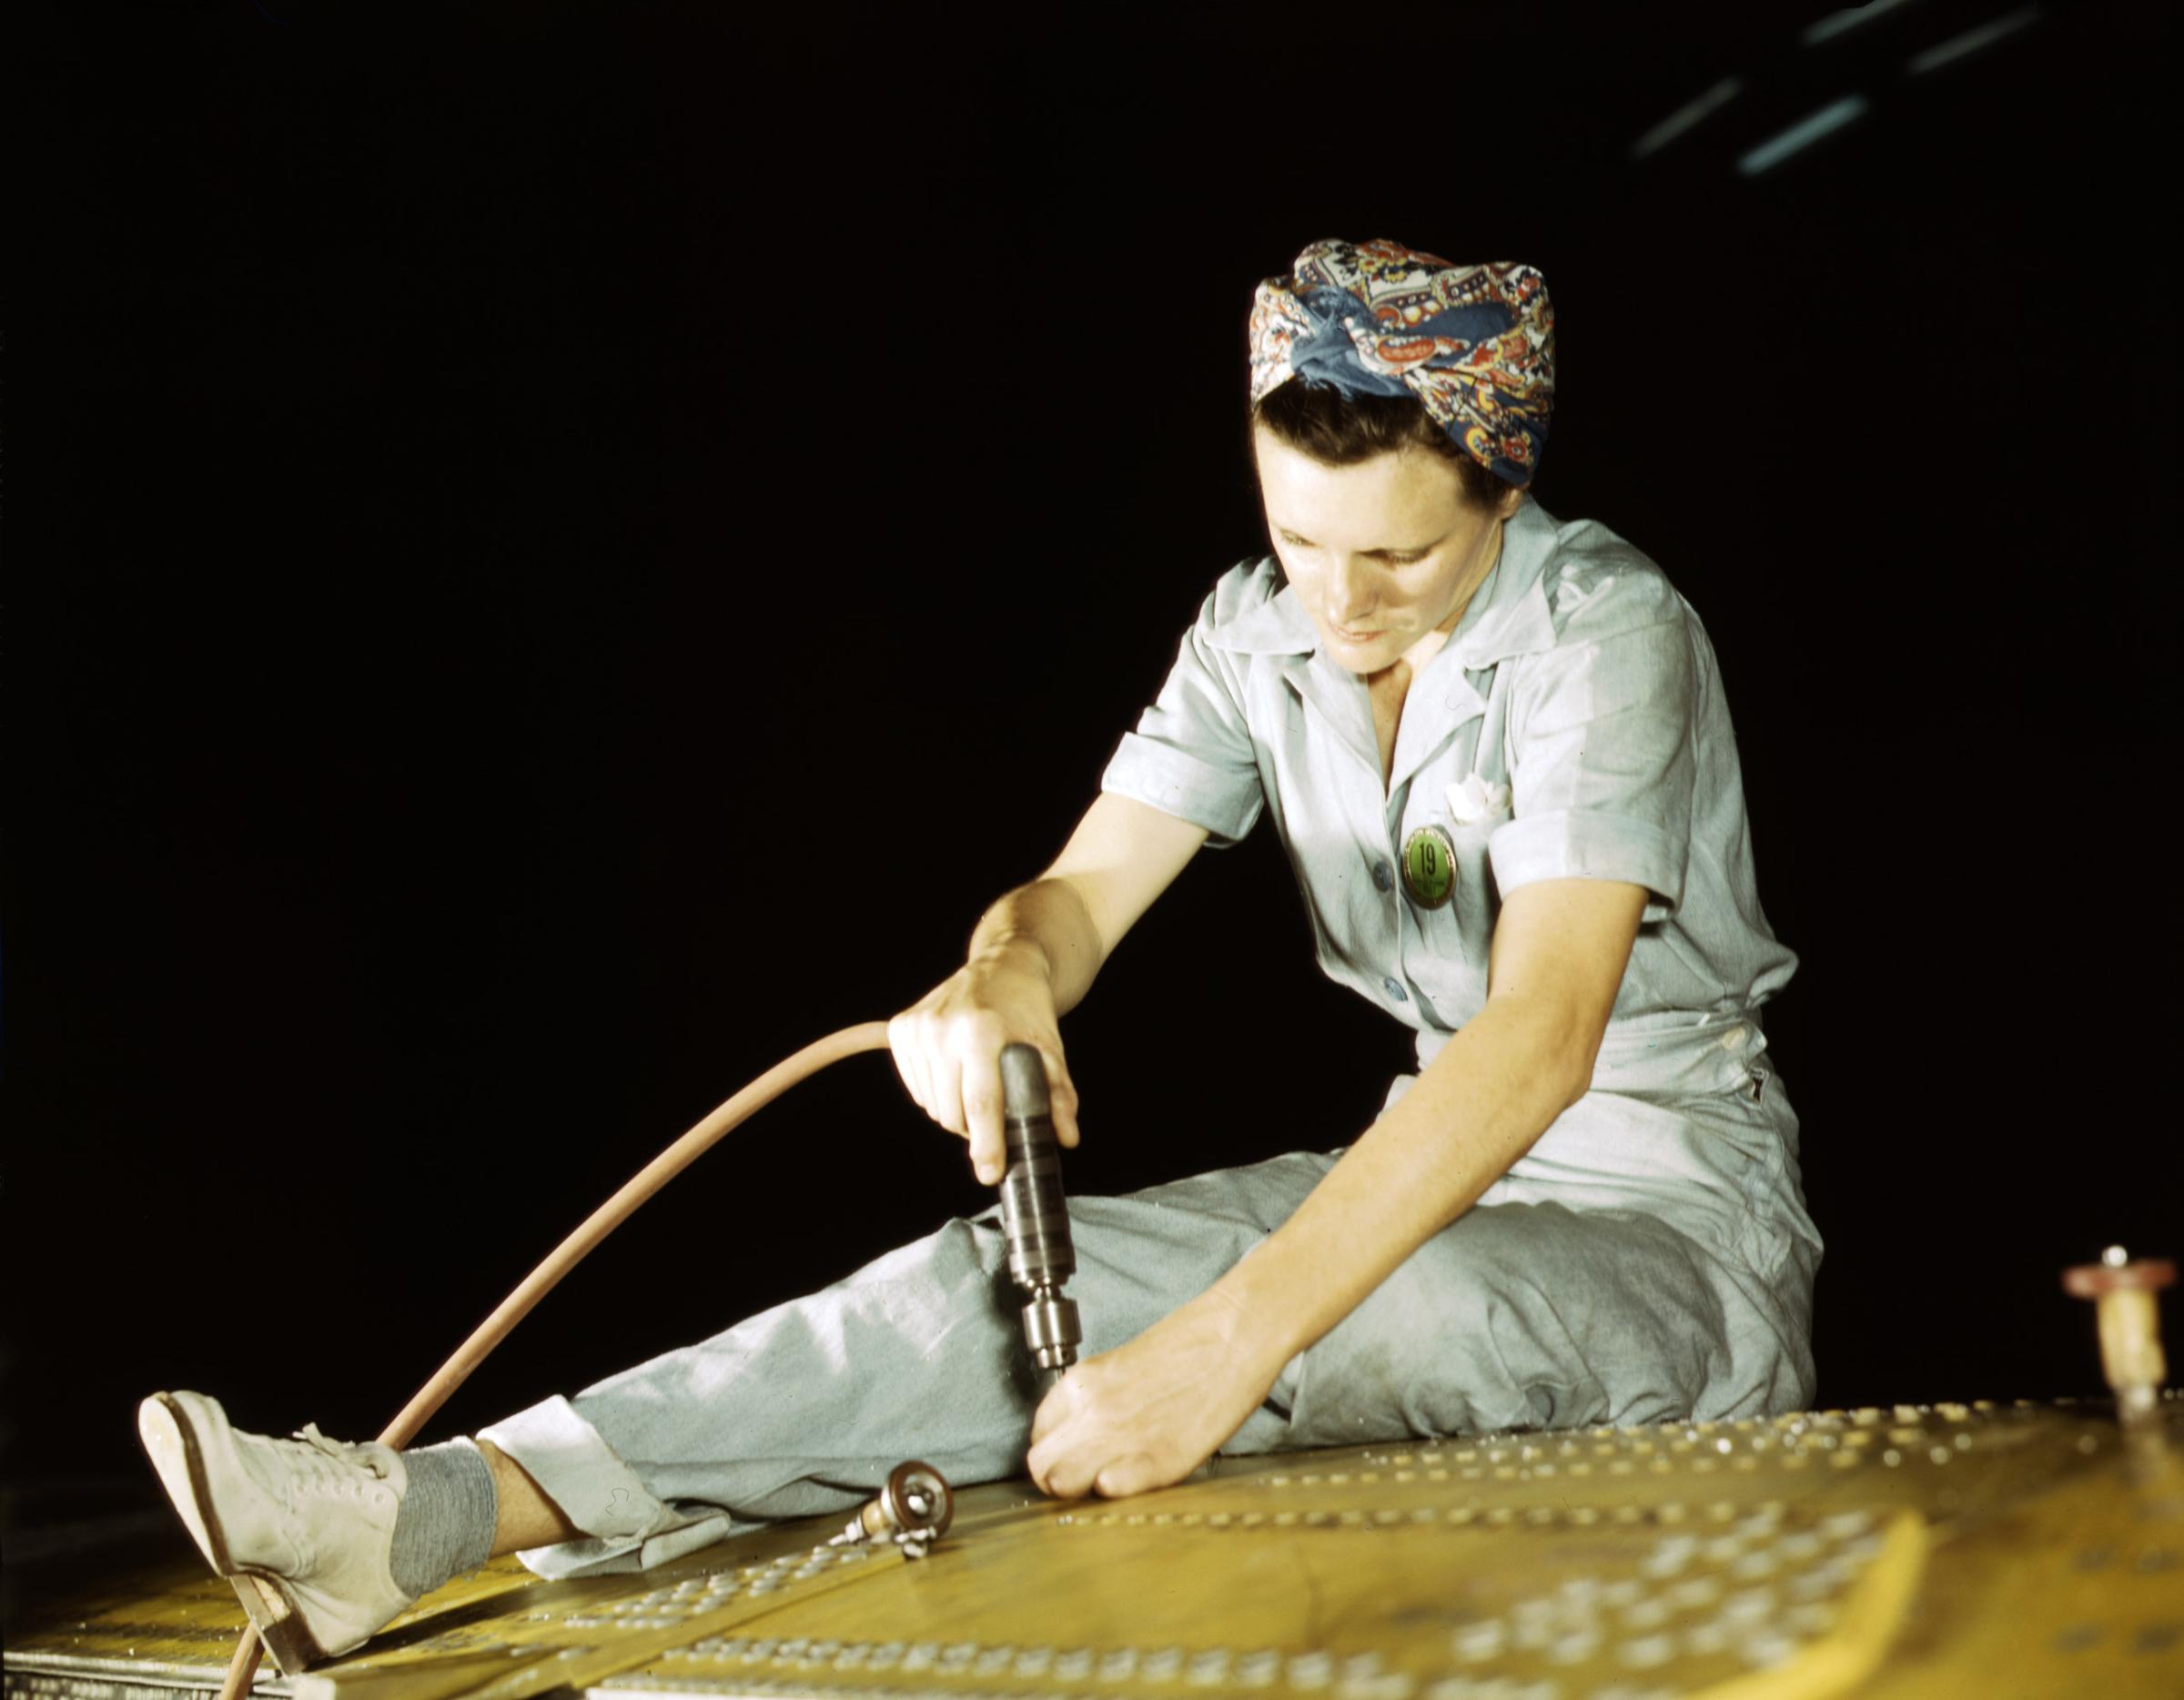 Drilling on a Liberator Bomber, Consolidated Aircraft Corp., Fort Worth, Texas, October 1942. Photographed by Howard R. Hollem for the Farm Security Administration.